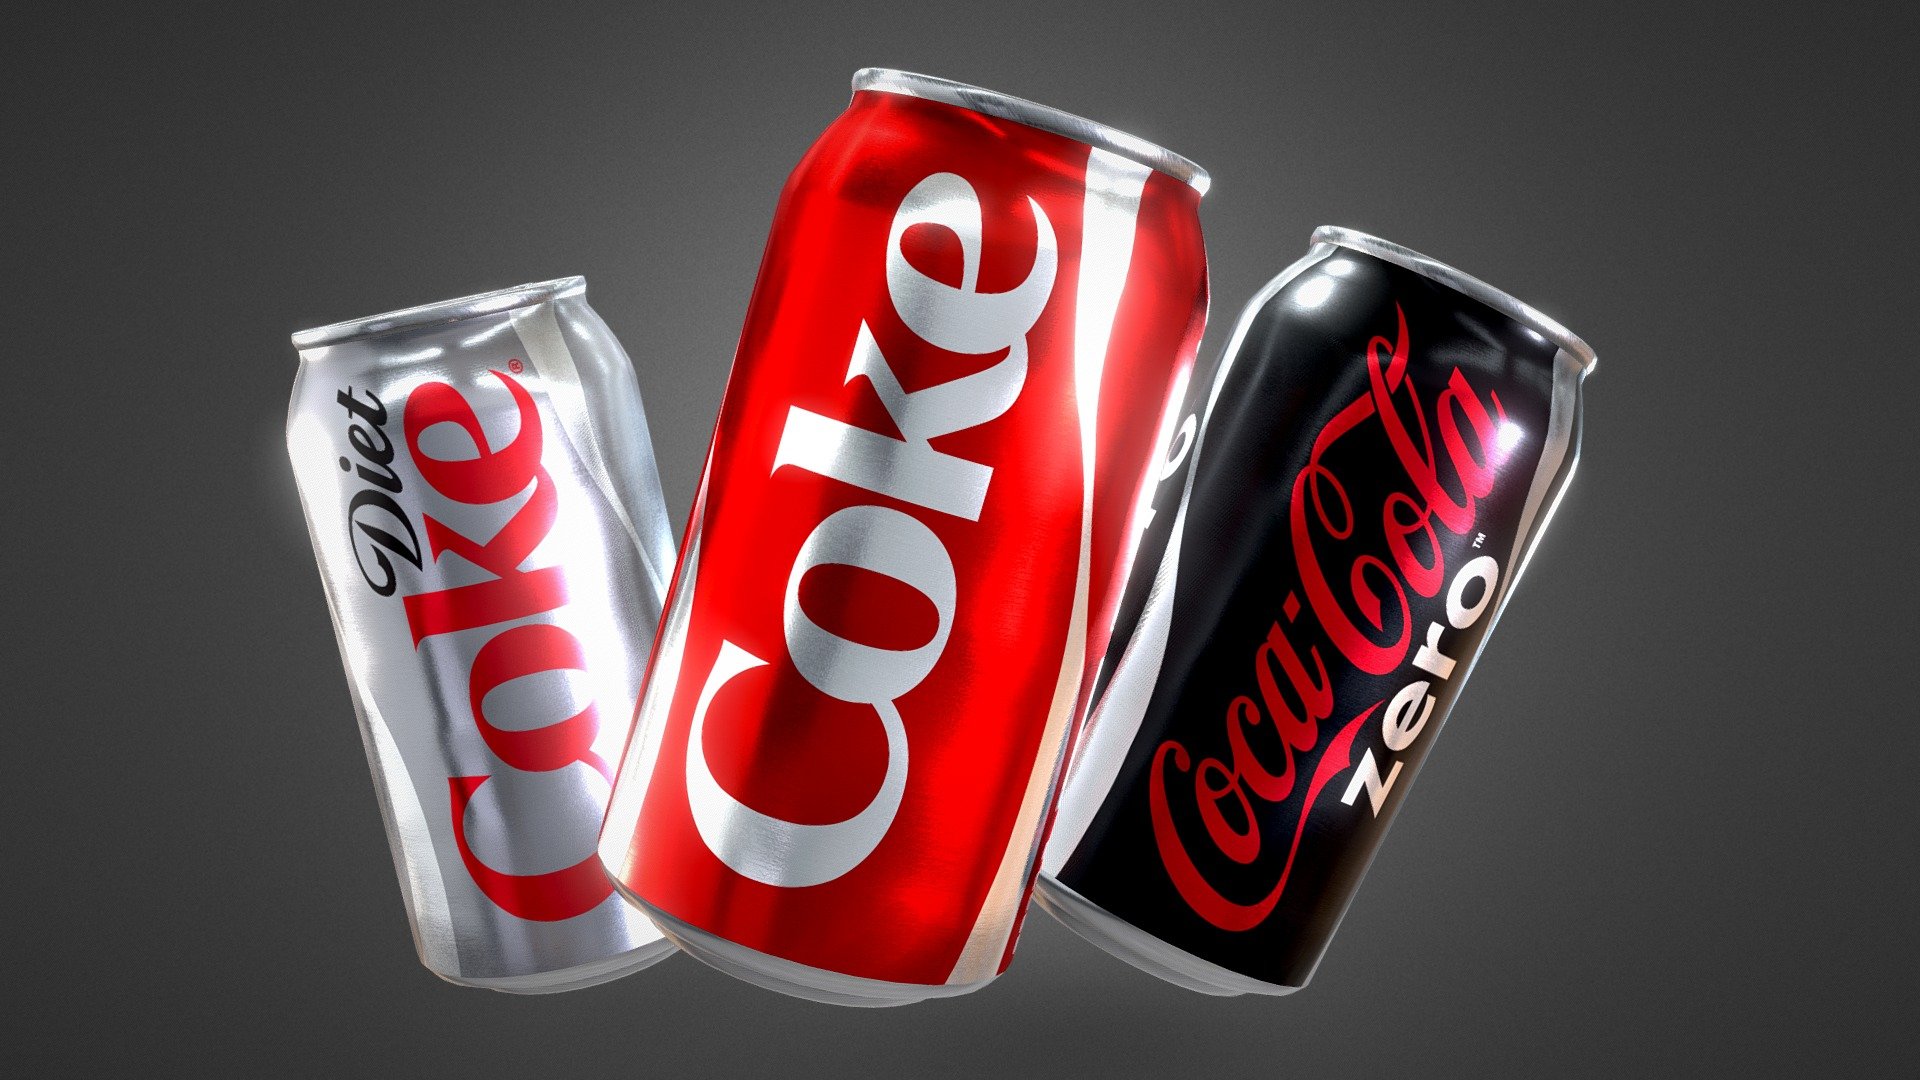 Pack of Coca Cola (classic, zero and diet) cans with a PBR workflow, mainly suitable for archviz/realistic purposes, but can also be used for VR/AR projects and as a game asset.

The model contains a Zip file, with:




2 Versions for every file format: Beveled - suitable for subdivision and/or smooth shading, Subdivided - subdivided in advance;

Tailored textures with multiple resolutions (2K, 4K) for a PBR Metalness workflow, such as DIFFUSE/METALLIC/ROUGHNESS/NORMAL, multiple versions of textures - open and closed lid;

Both OpenGL and DirectX normal maps;

An additional preview scene with a camera, lights, and a background;

All model versions include UV unwrapping, appropriate pivot/origin points and object parenting;

Formats: 
1. fbx.
2. obj.
3. dae.
4. blend.




Scale: Real World - Metric

Dimensions cm: 6.3 x 6.3 x 12.5 (2.5 x 2.5 x 4.9'&lsquo;)

Model parts: 2 (Can and tab)

Geometry: All quads with few appropriate triangles
 - Coca Cola Cans - Classic, Zero, Diet Coke Sodas - Buy Royalty Free 3D model by PatrickZhiaran 3d model